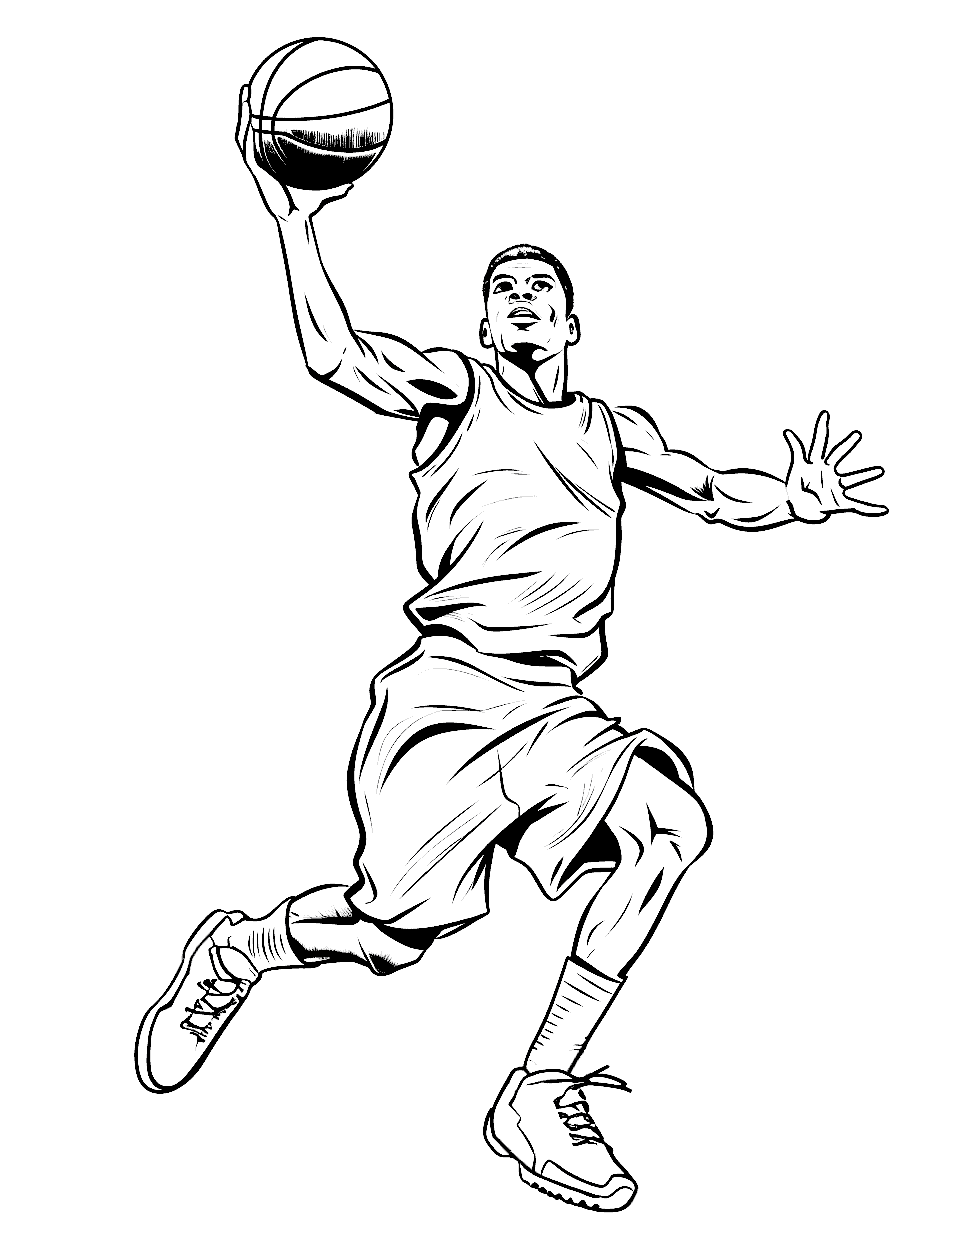 Player in Action Basketball Coloring Page - A player about to jump for a dunk to score that perfect last finish.